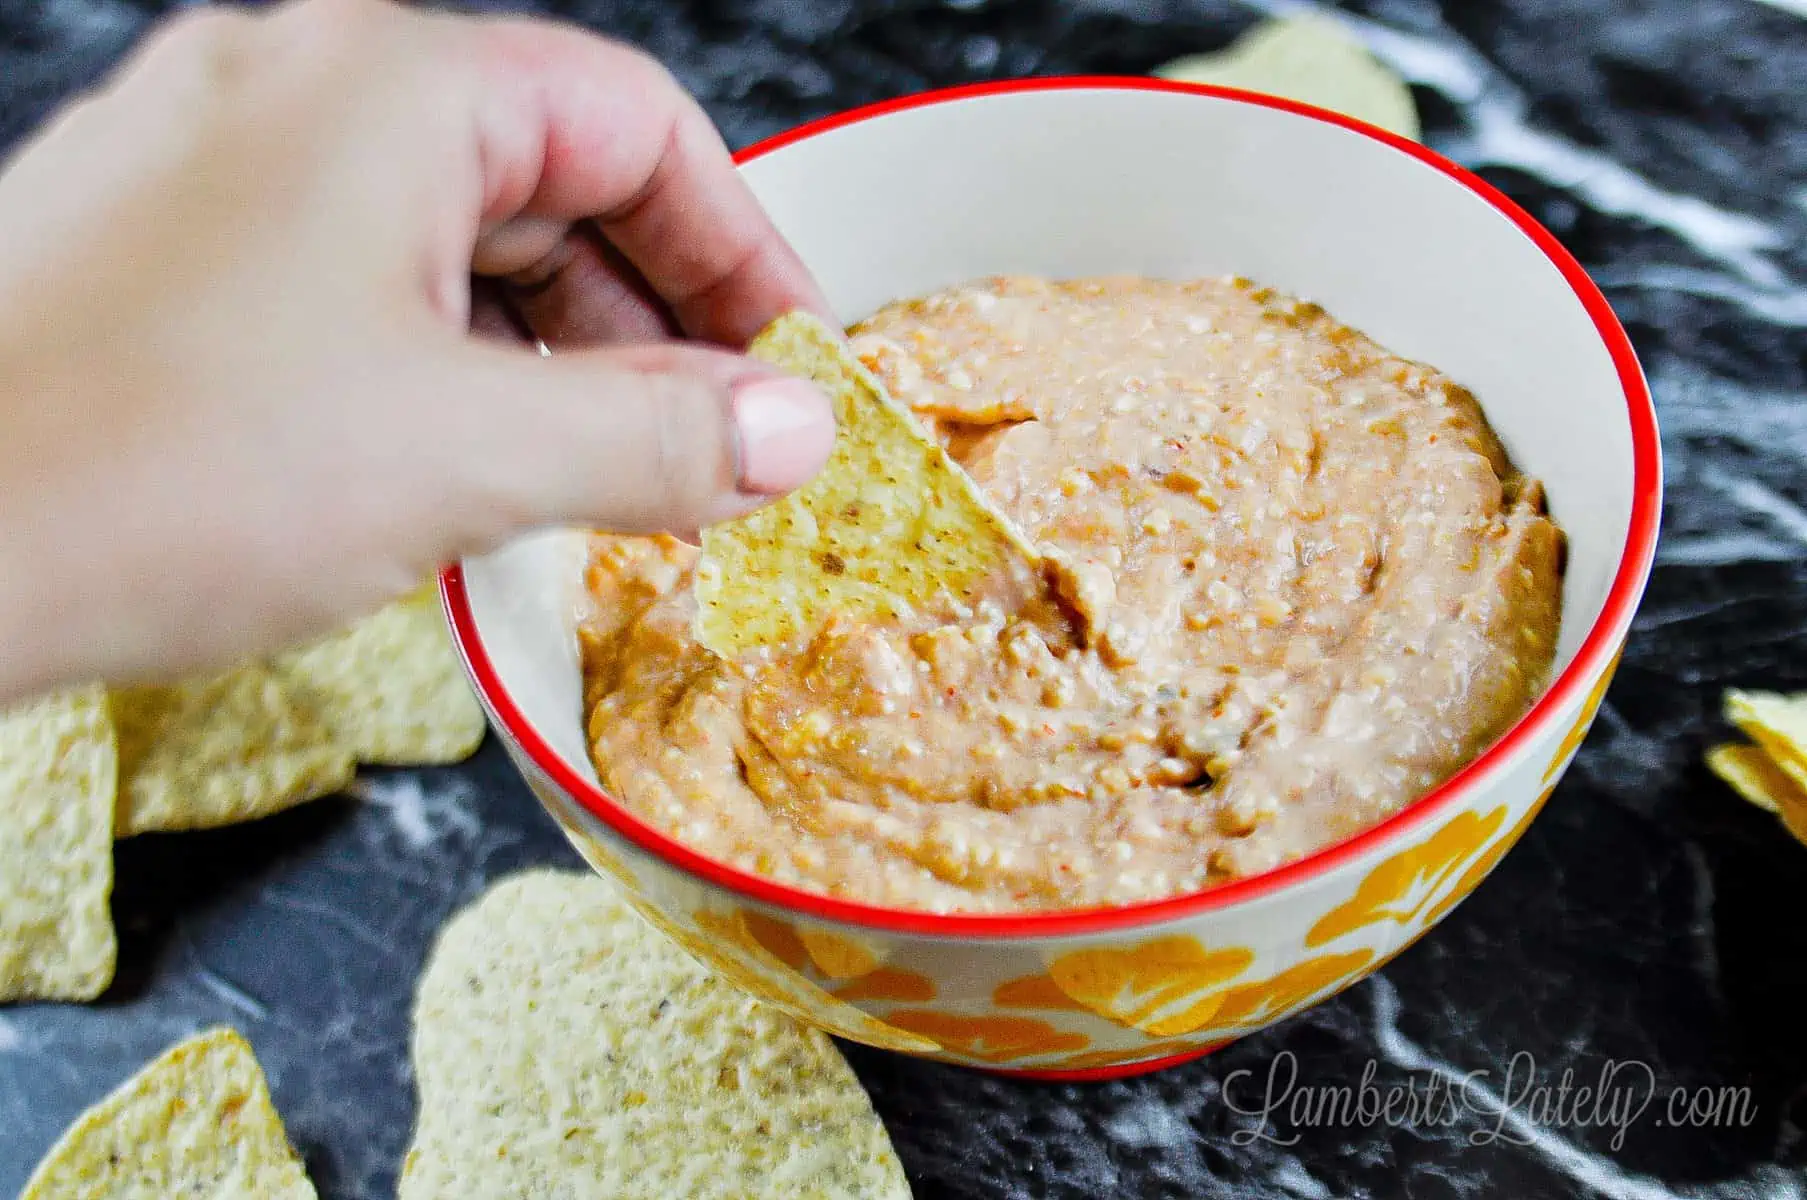 dipping a chip into dip.